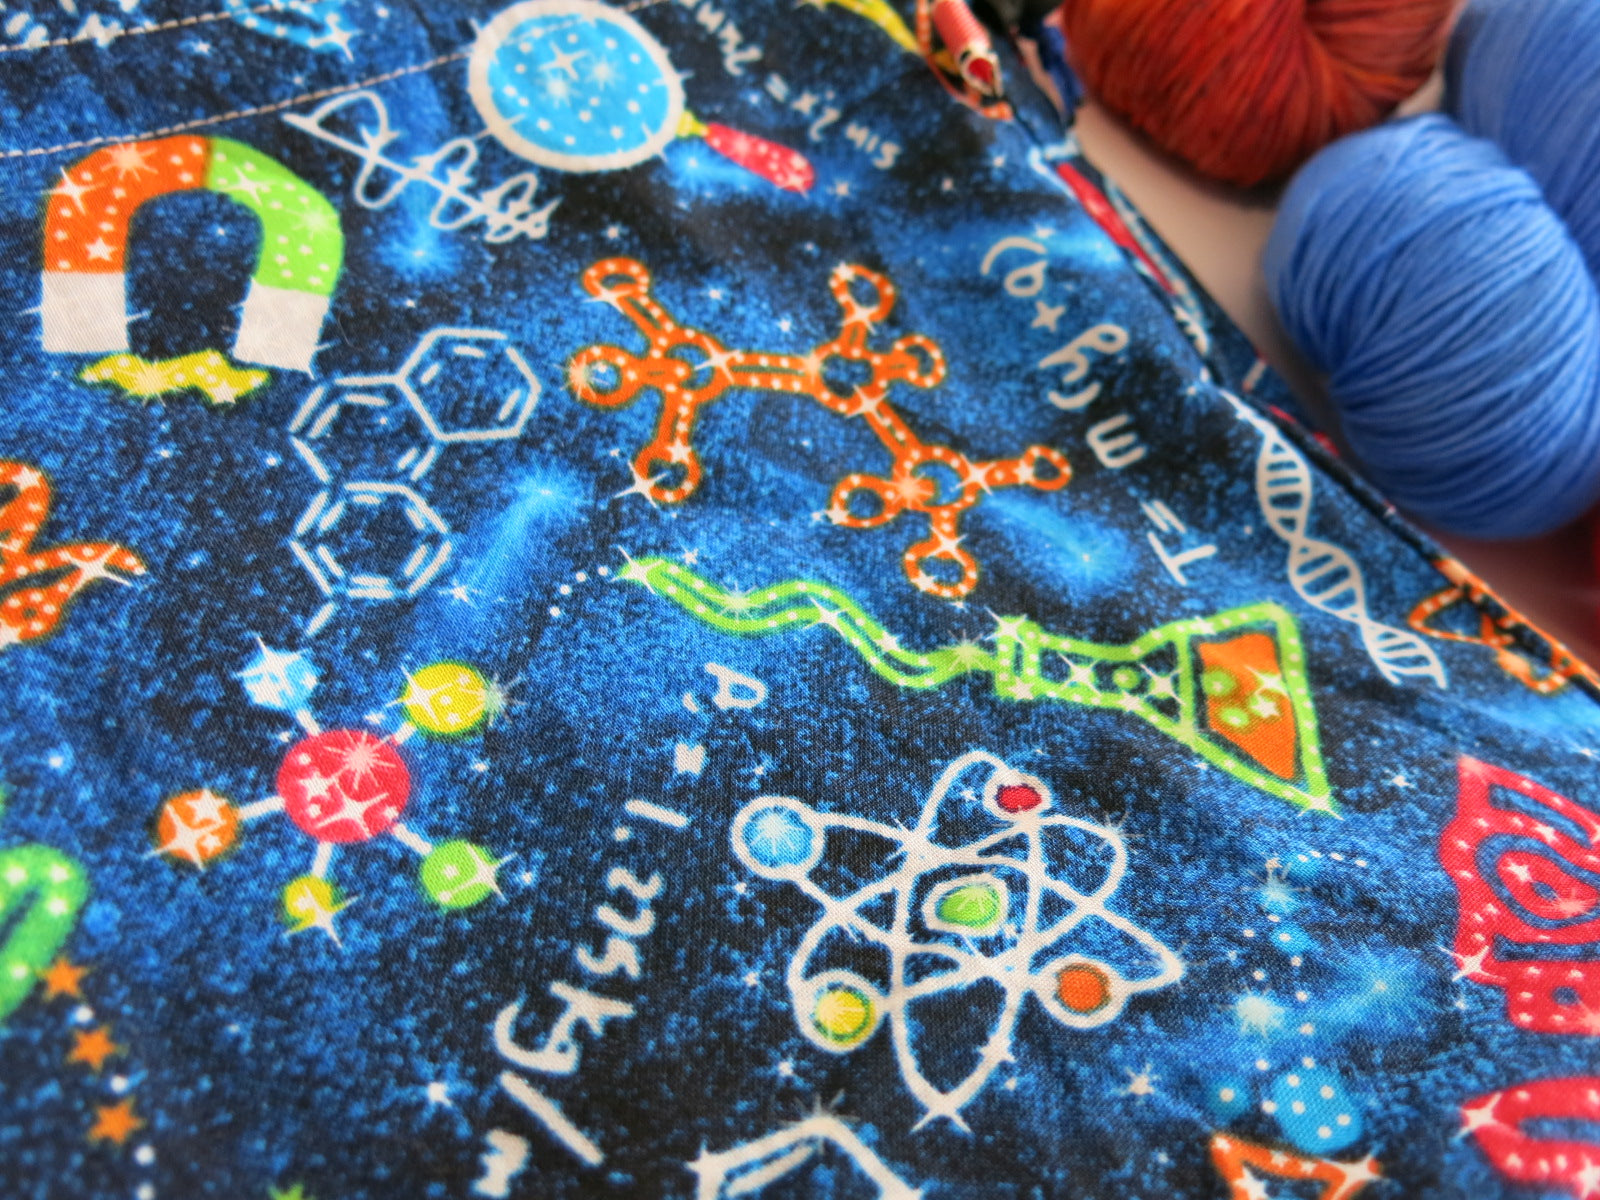 outer space and science themed toggle close drawstring tote bag